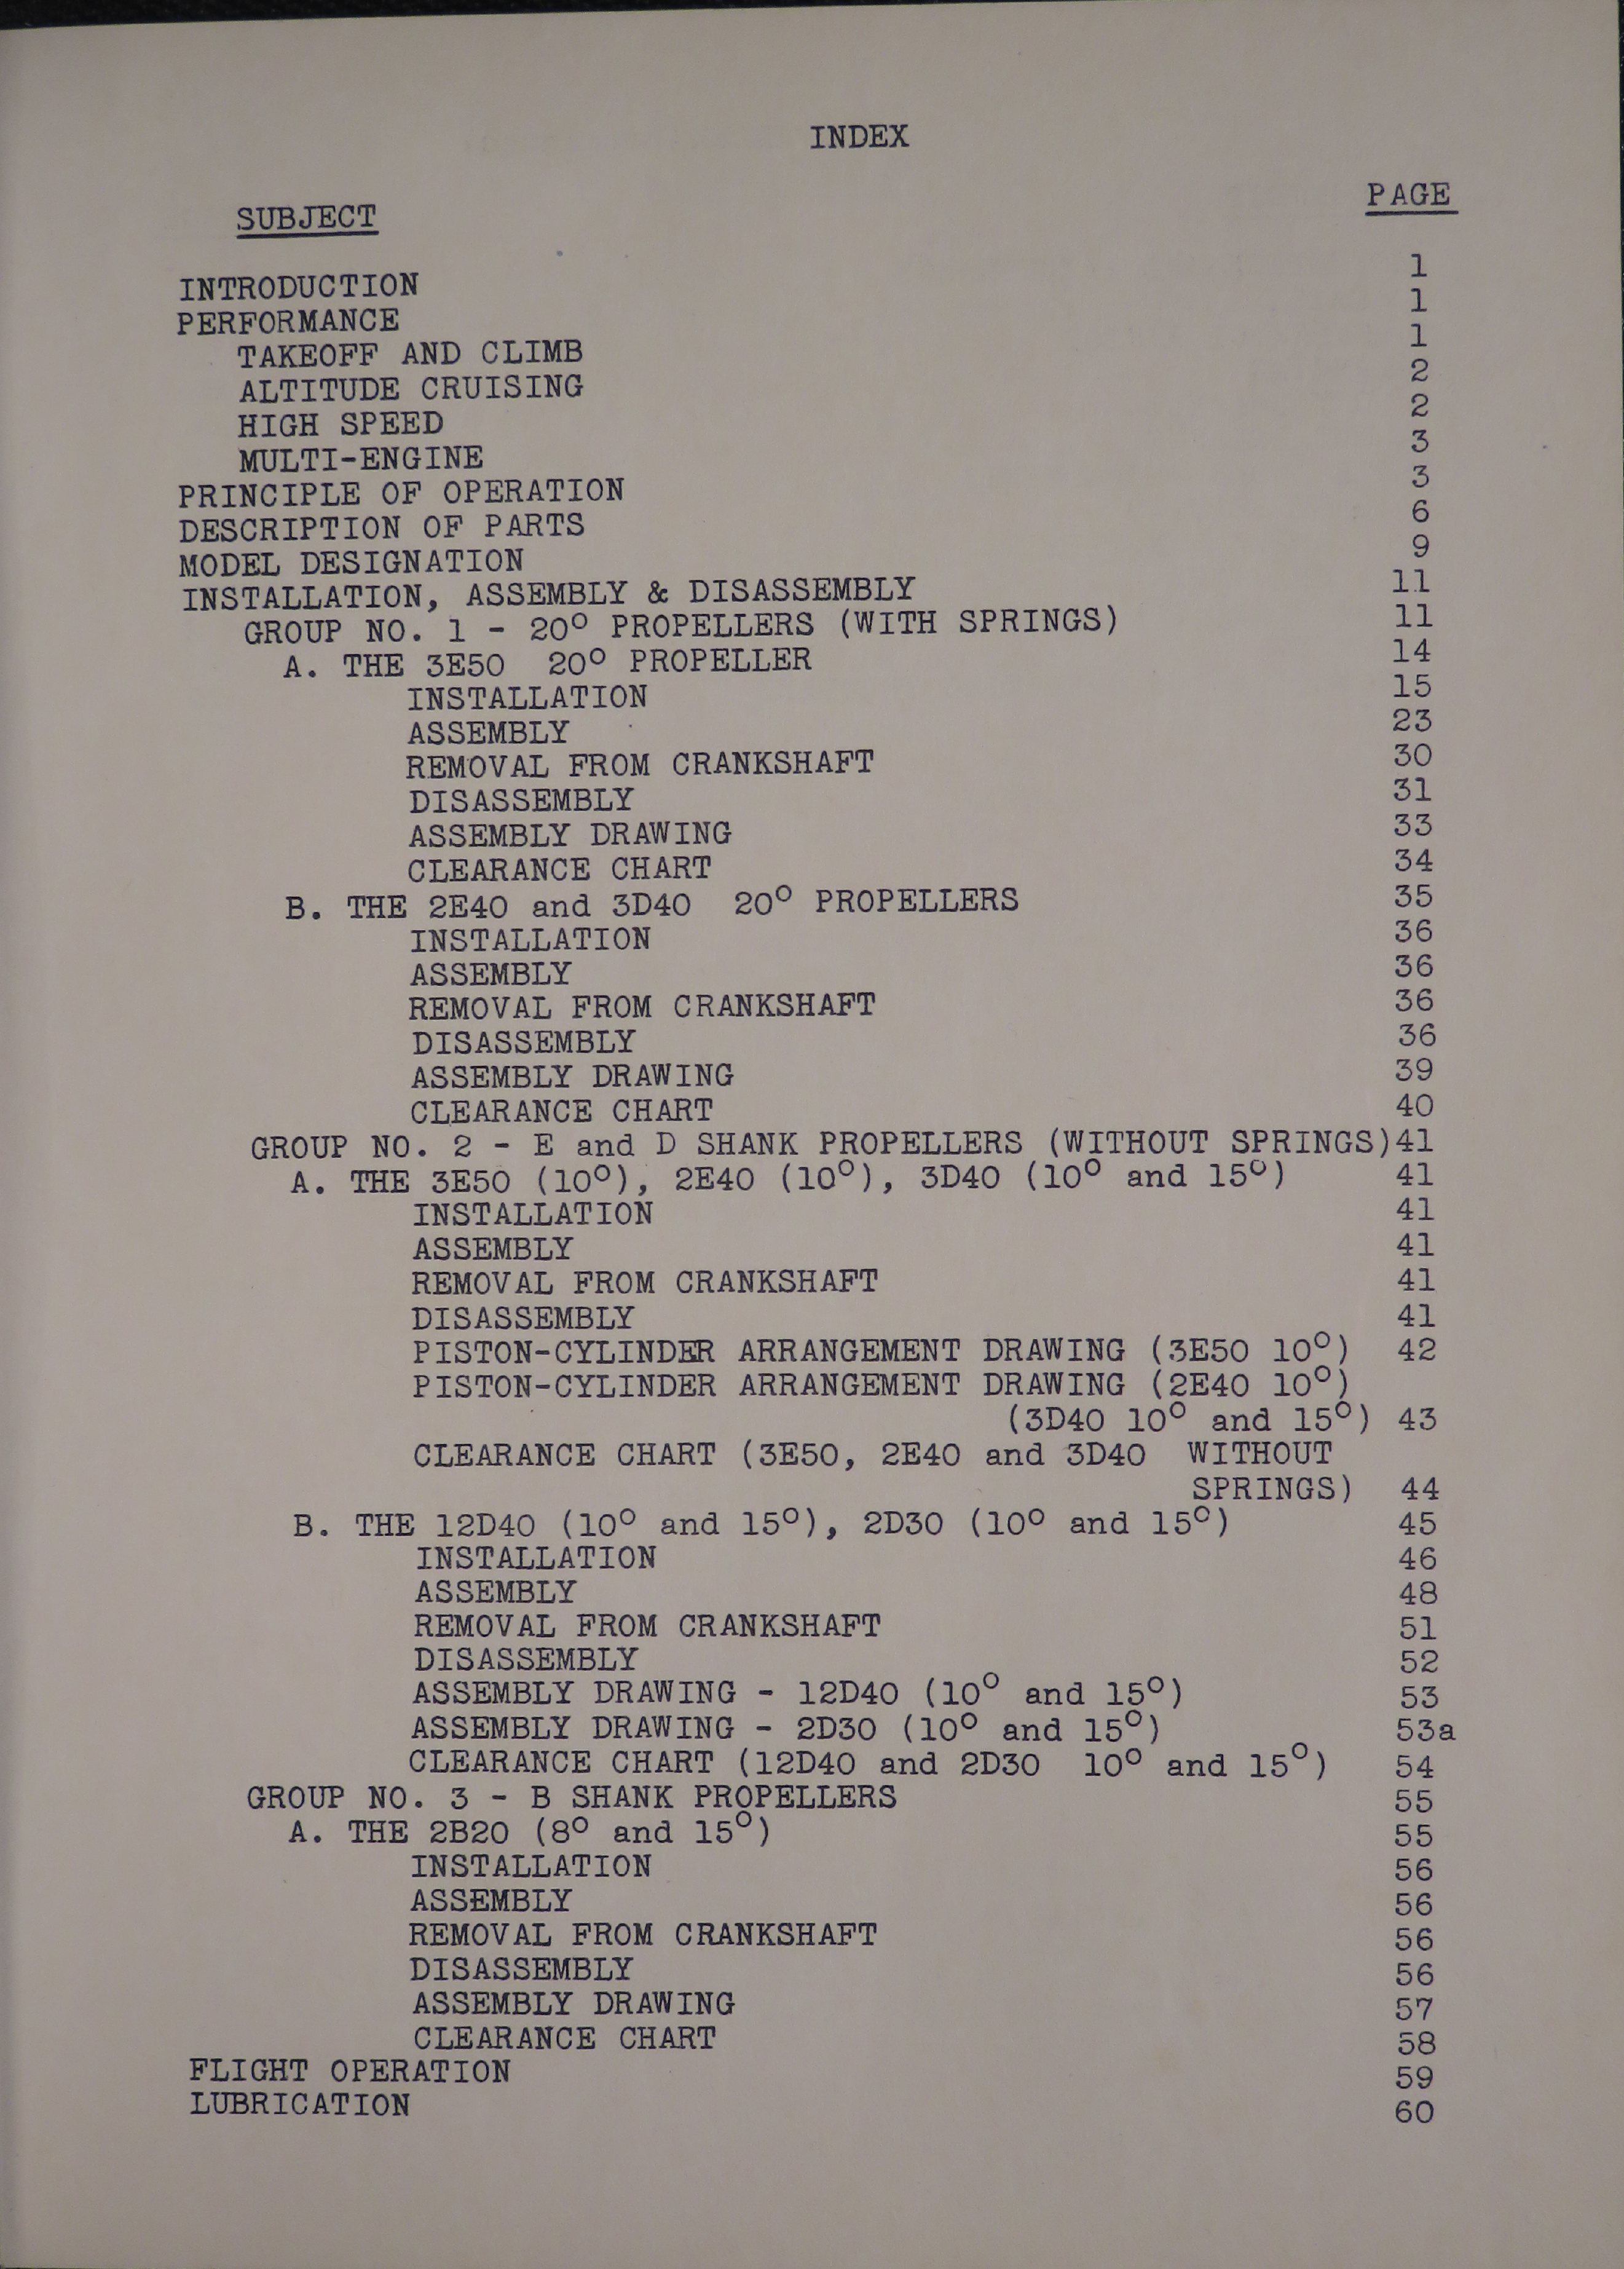 Sample page 5 from AirCorps Library document: Service Manual for Controllable and Constant Speed Hamilton Standard Propellers